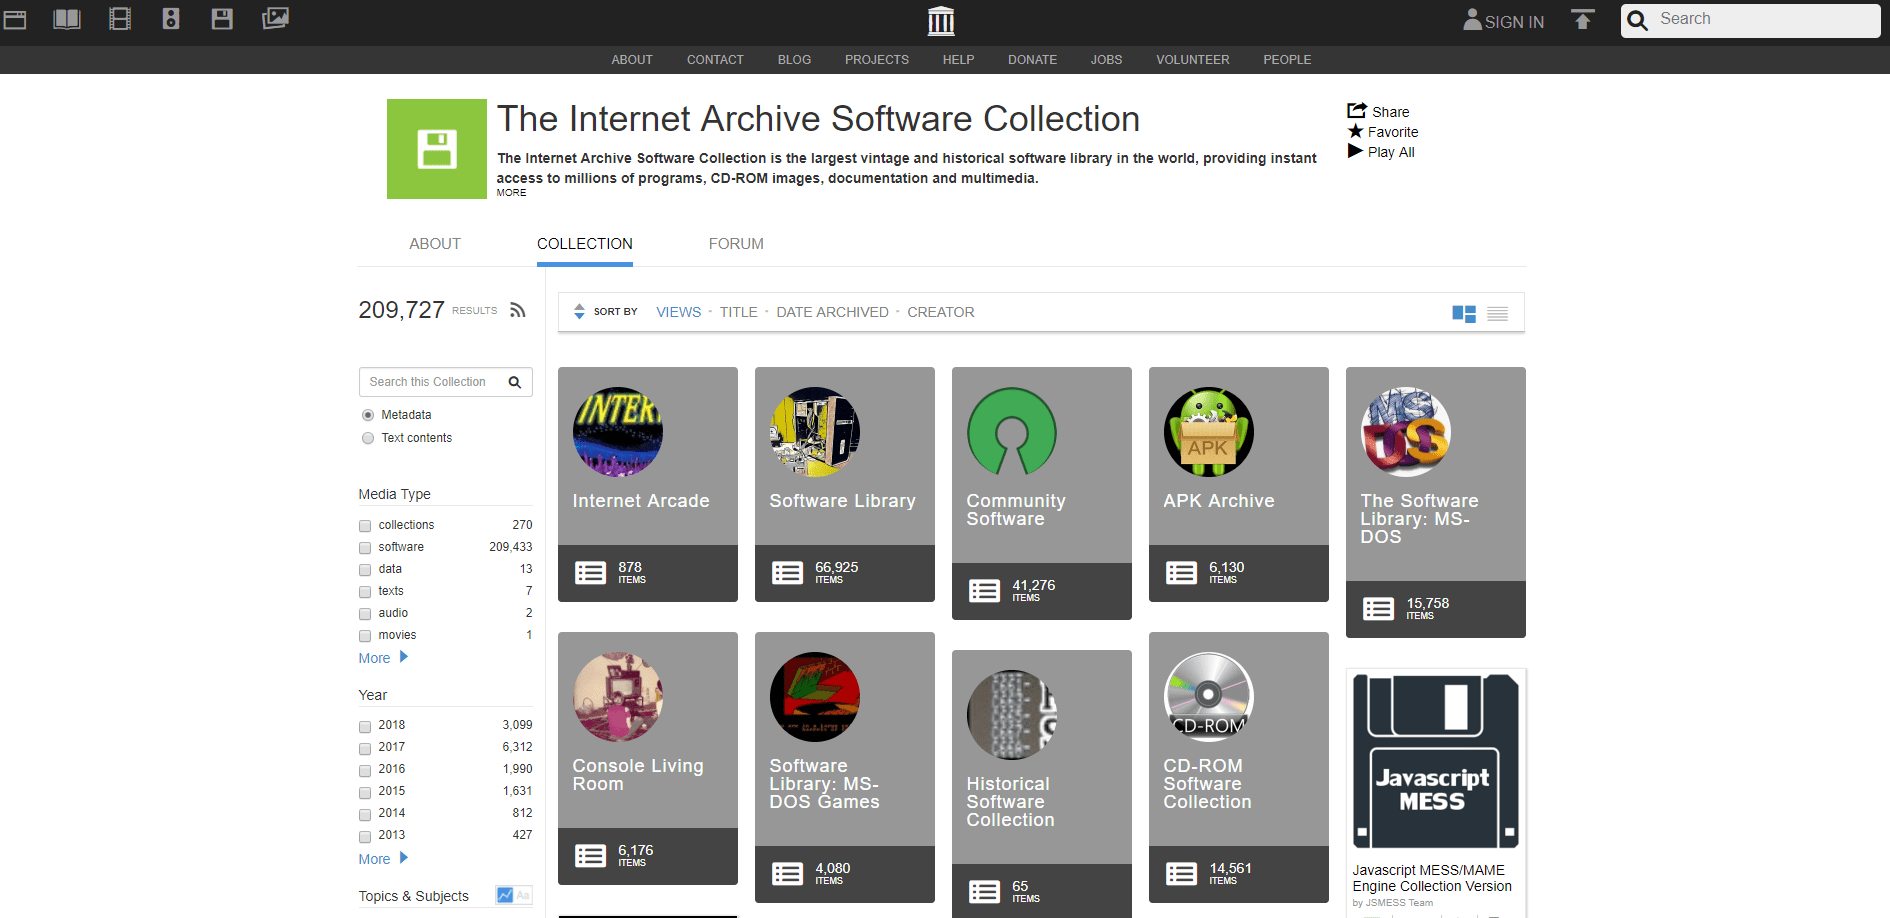 The Internet Archive Software Collection